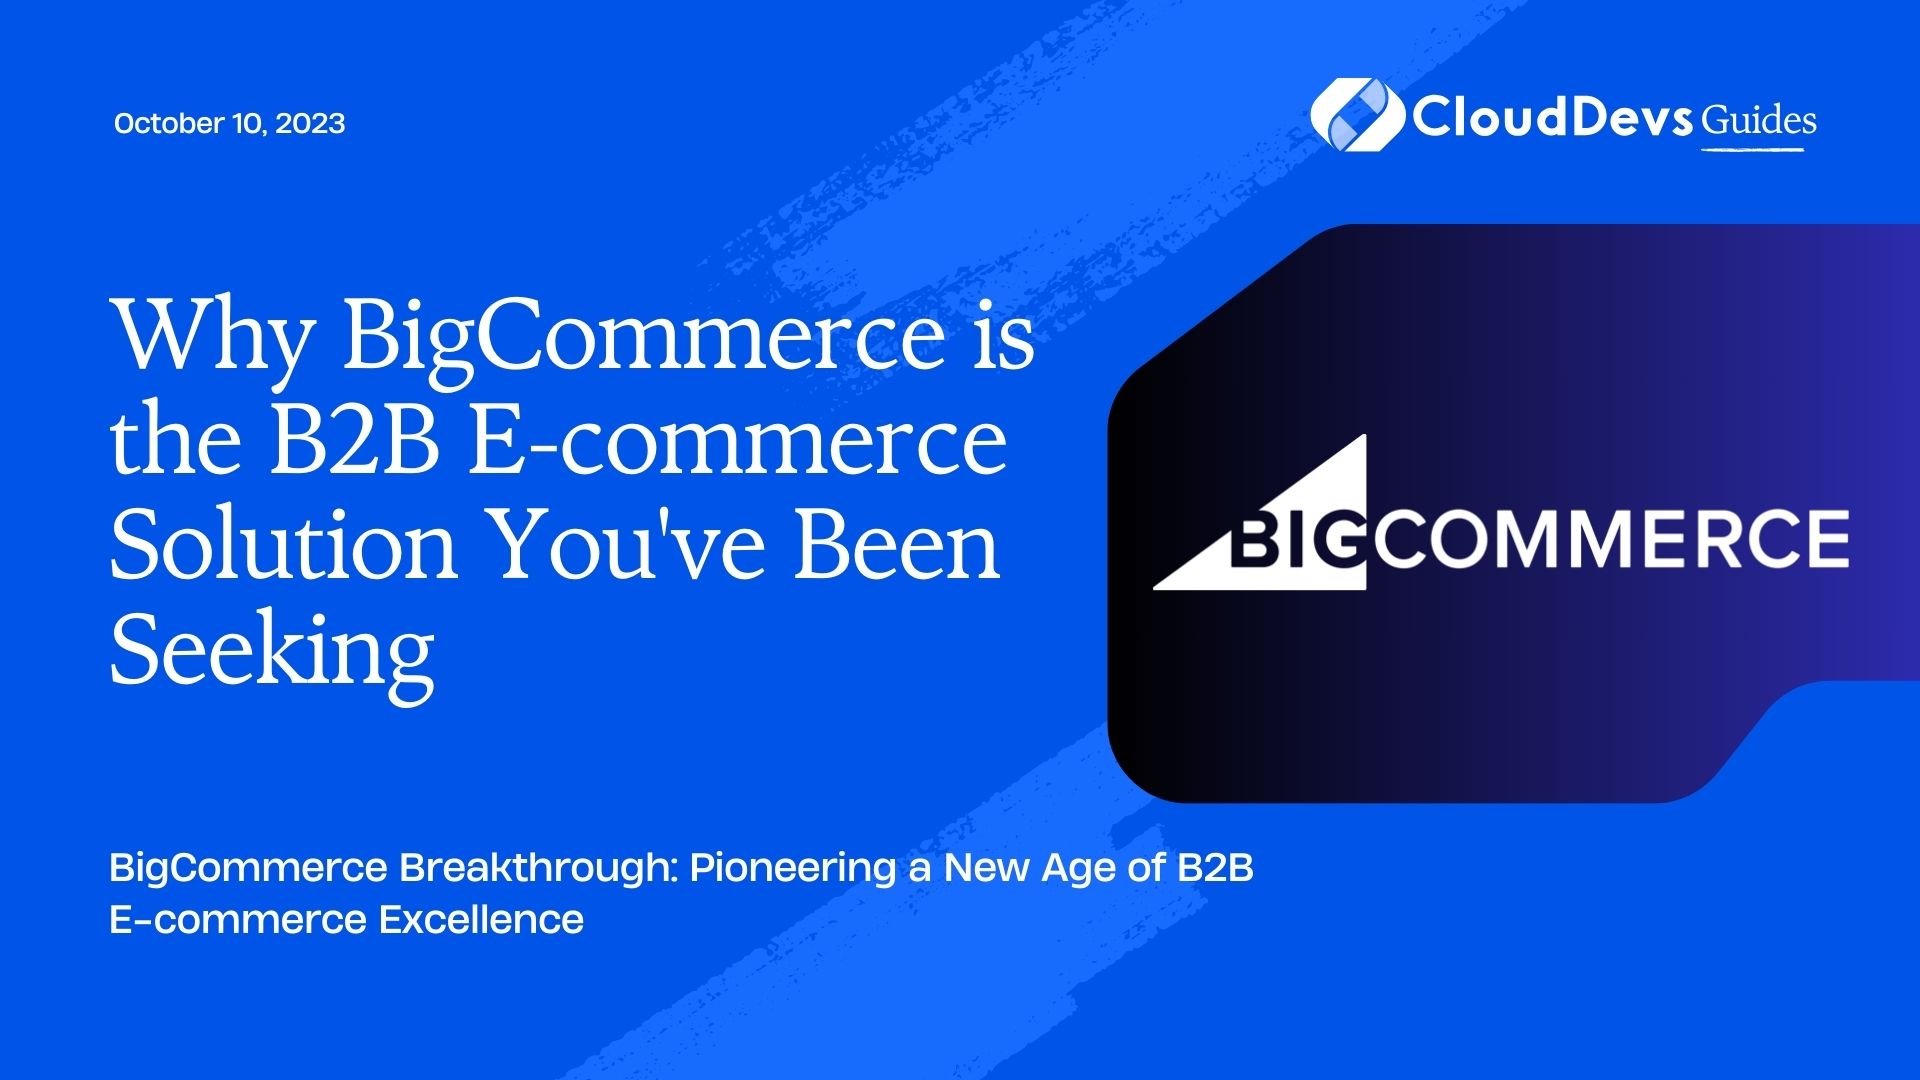 Why BigCommerce is the B2B E-commerce Solution You've Been Seeking